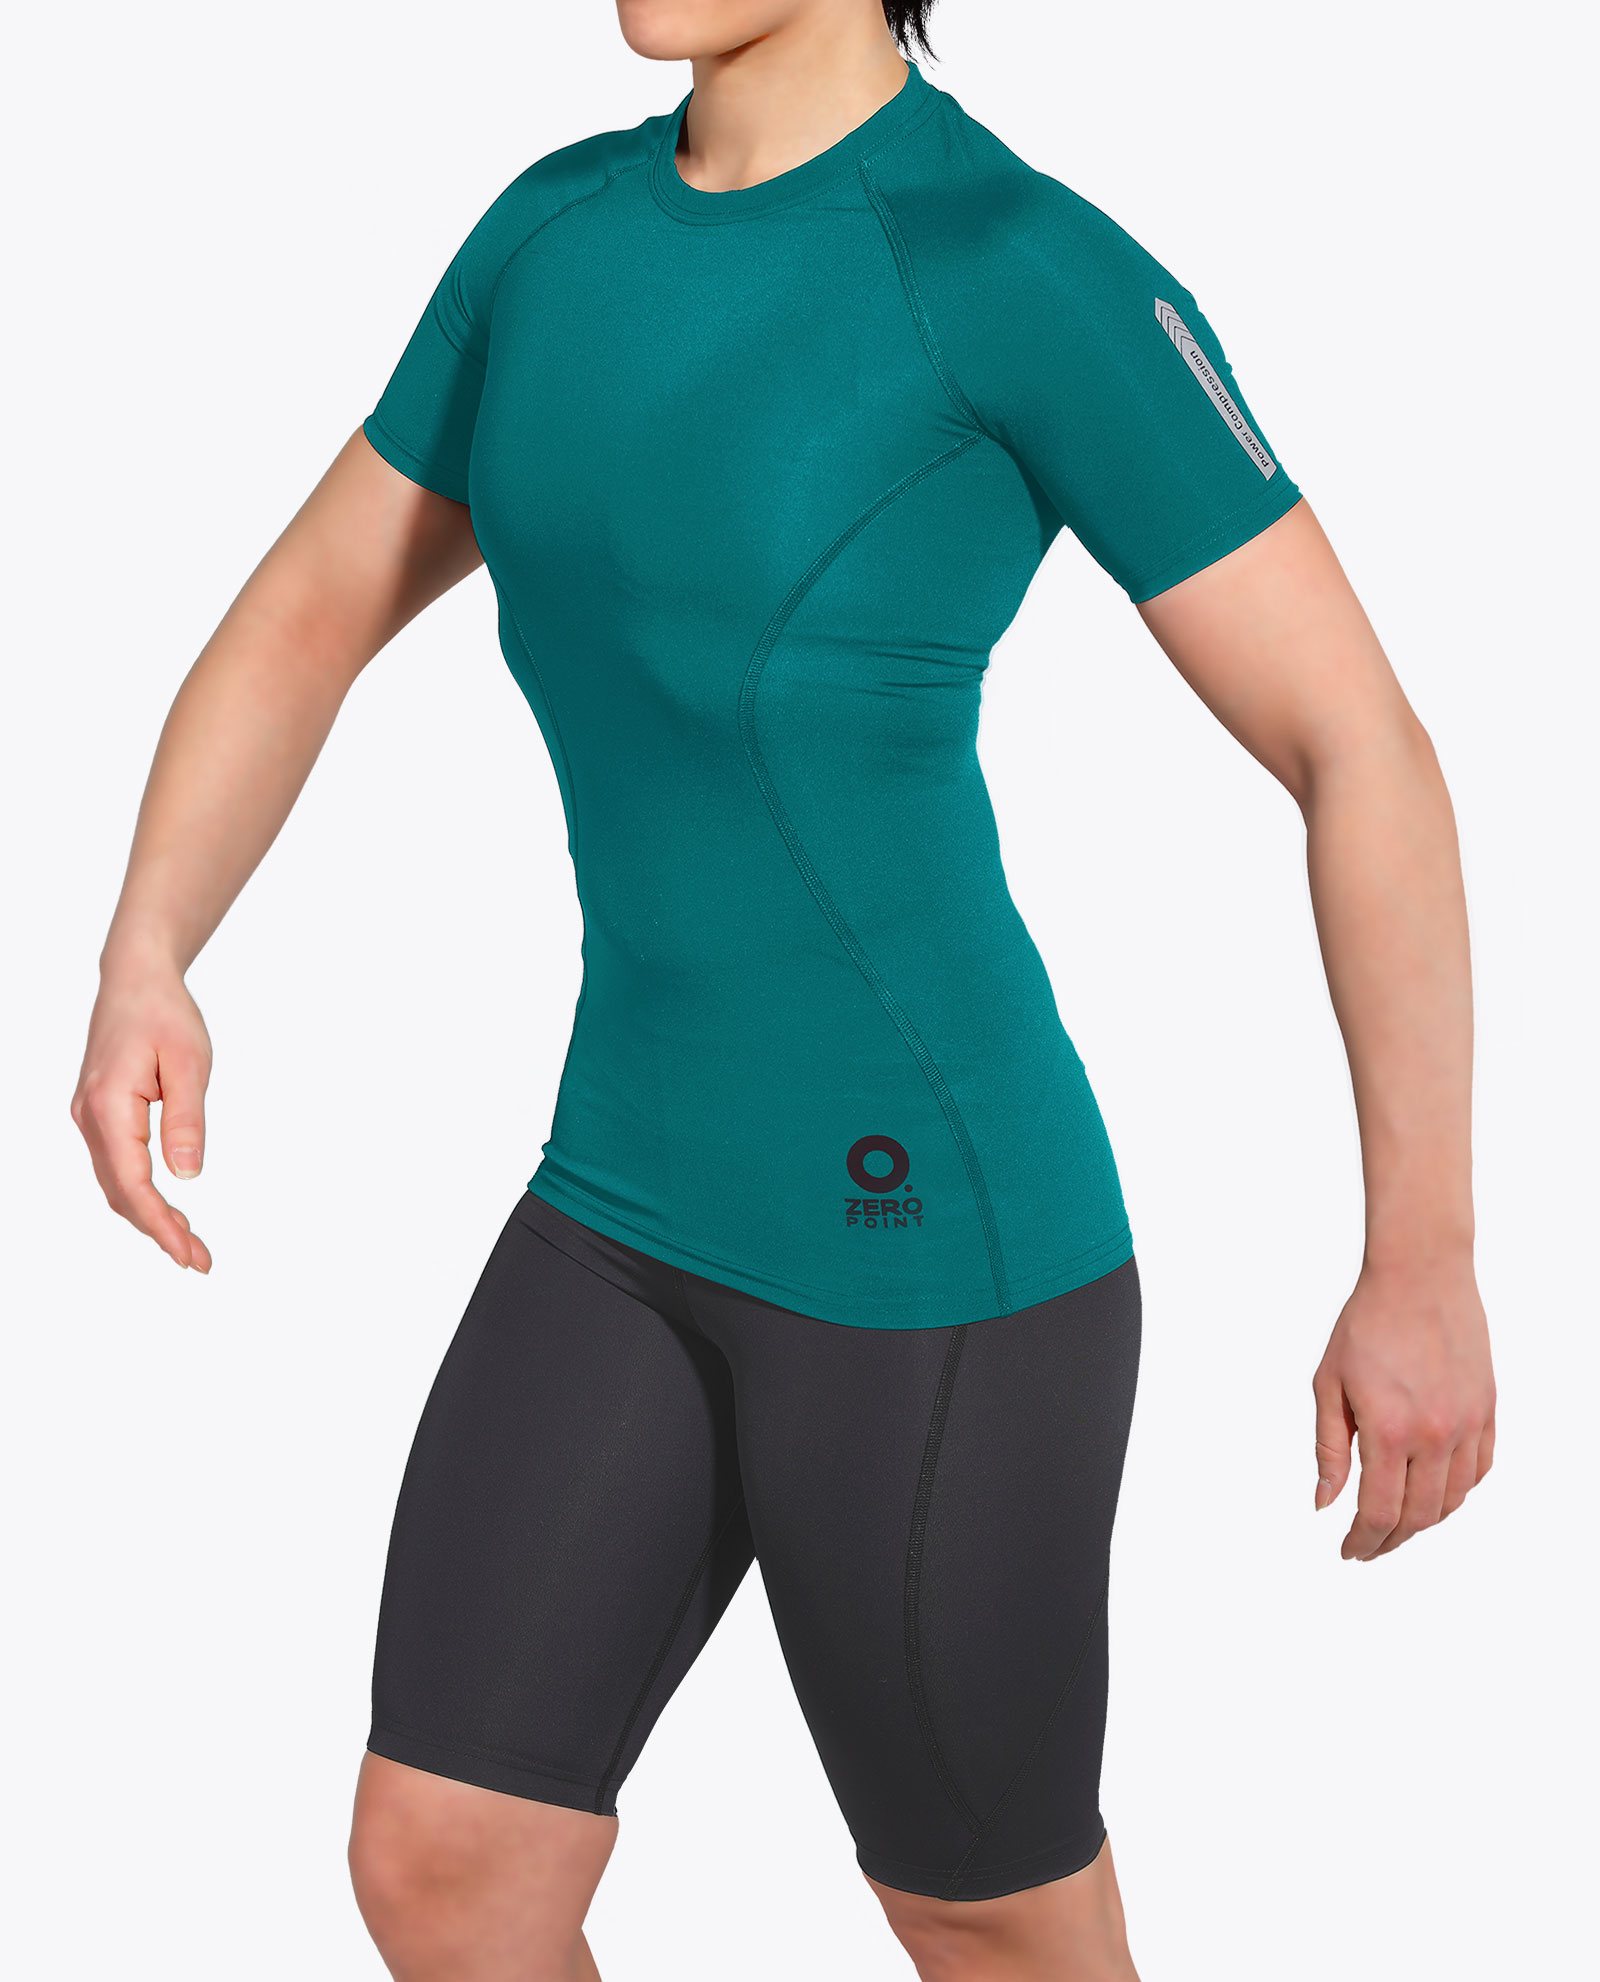 Short Sleeve Compression Top - ZEROPOINT